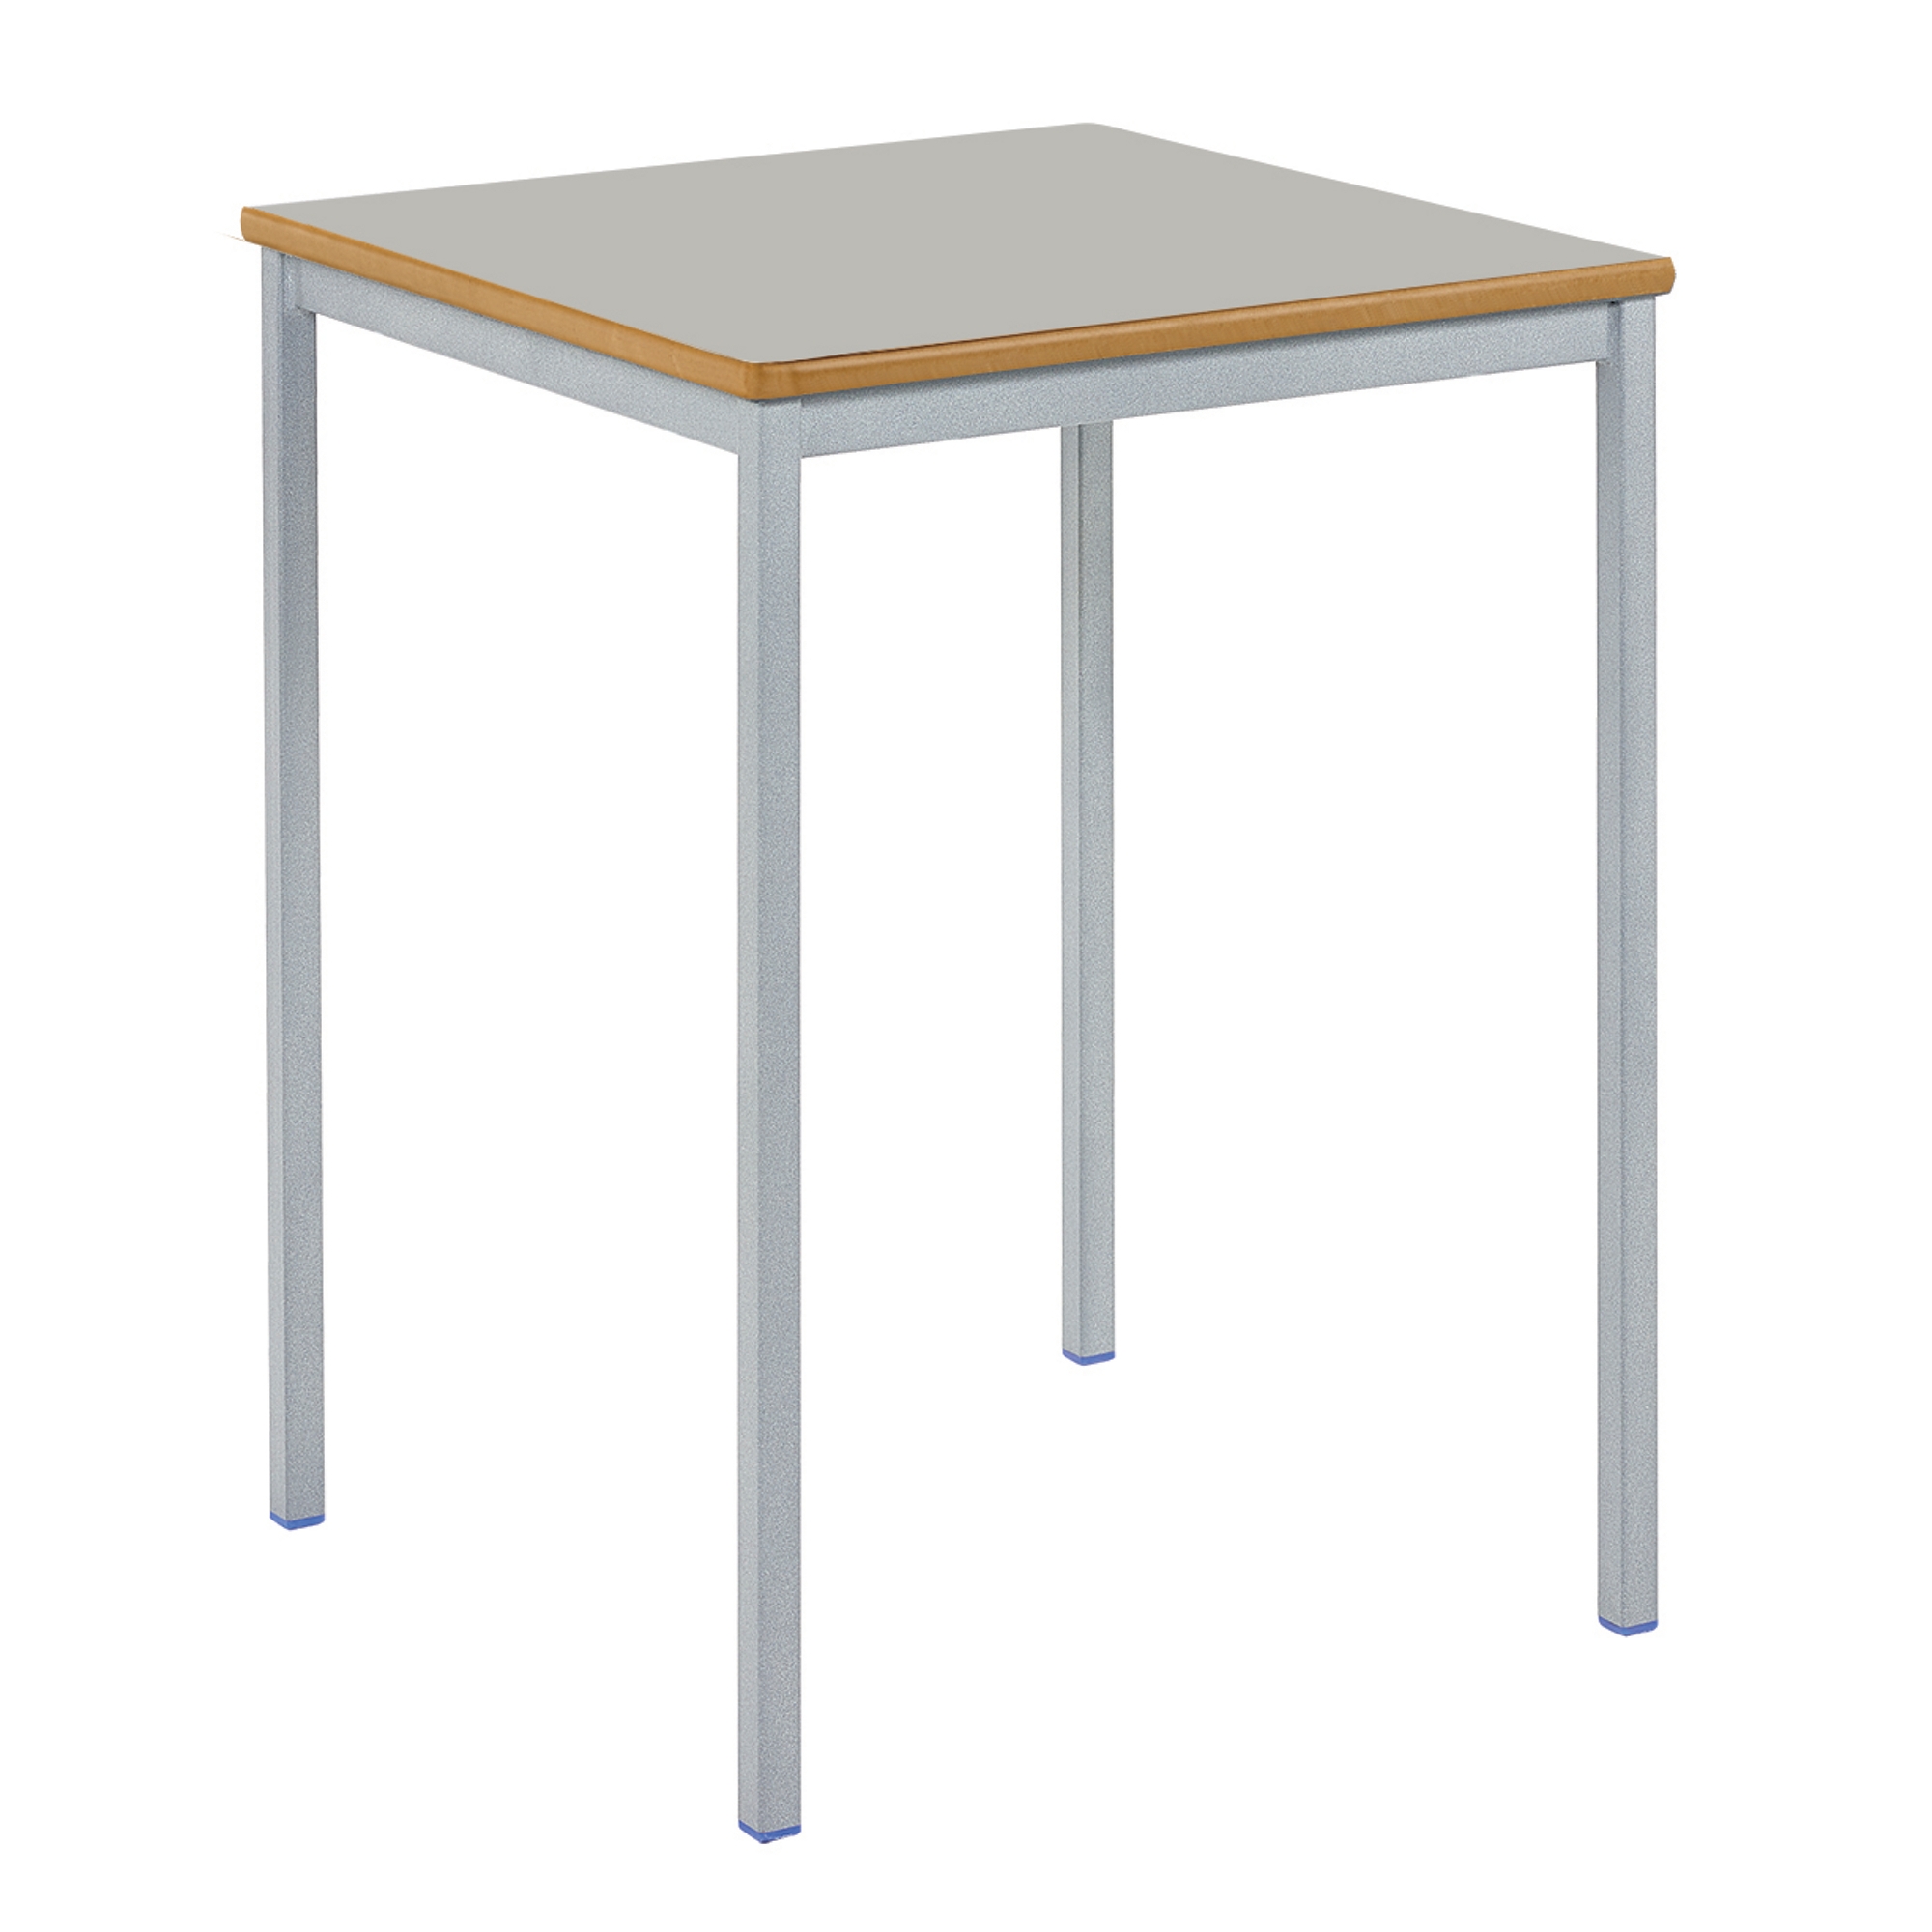 Classmates Square Fully Welded Classroom Table - 600 x 600 x 530mm - Grey